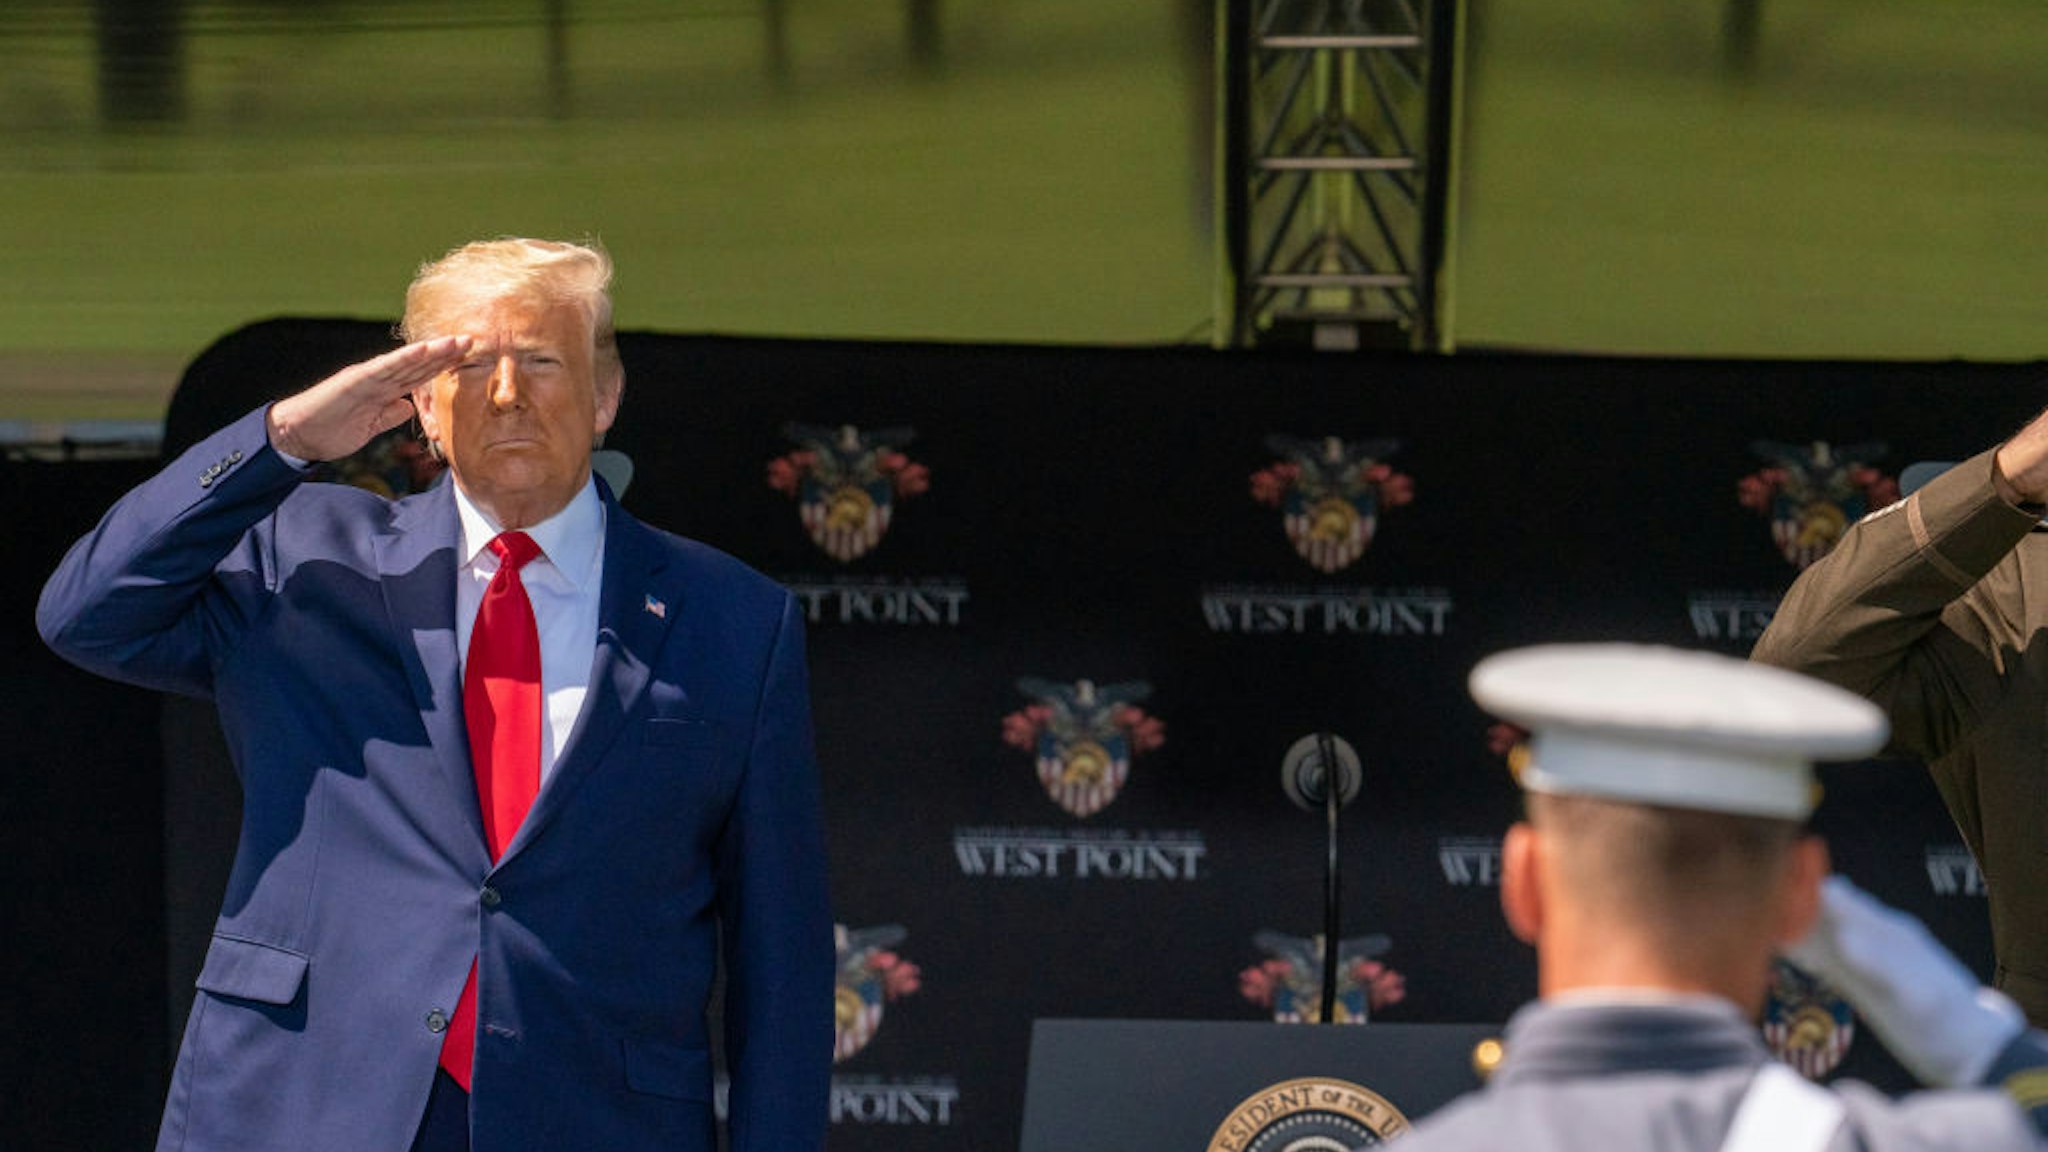 President Donald Trump salutes cadets at the beginning of the commencement ceremony on June 13, 2020 in West Point, New York.